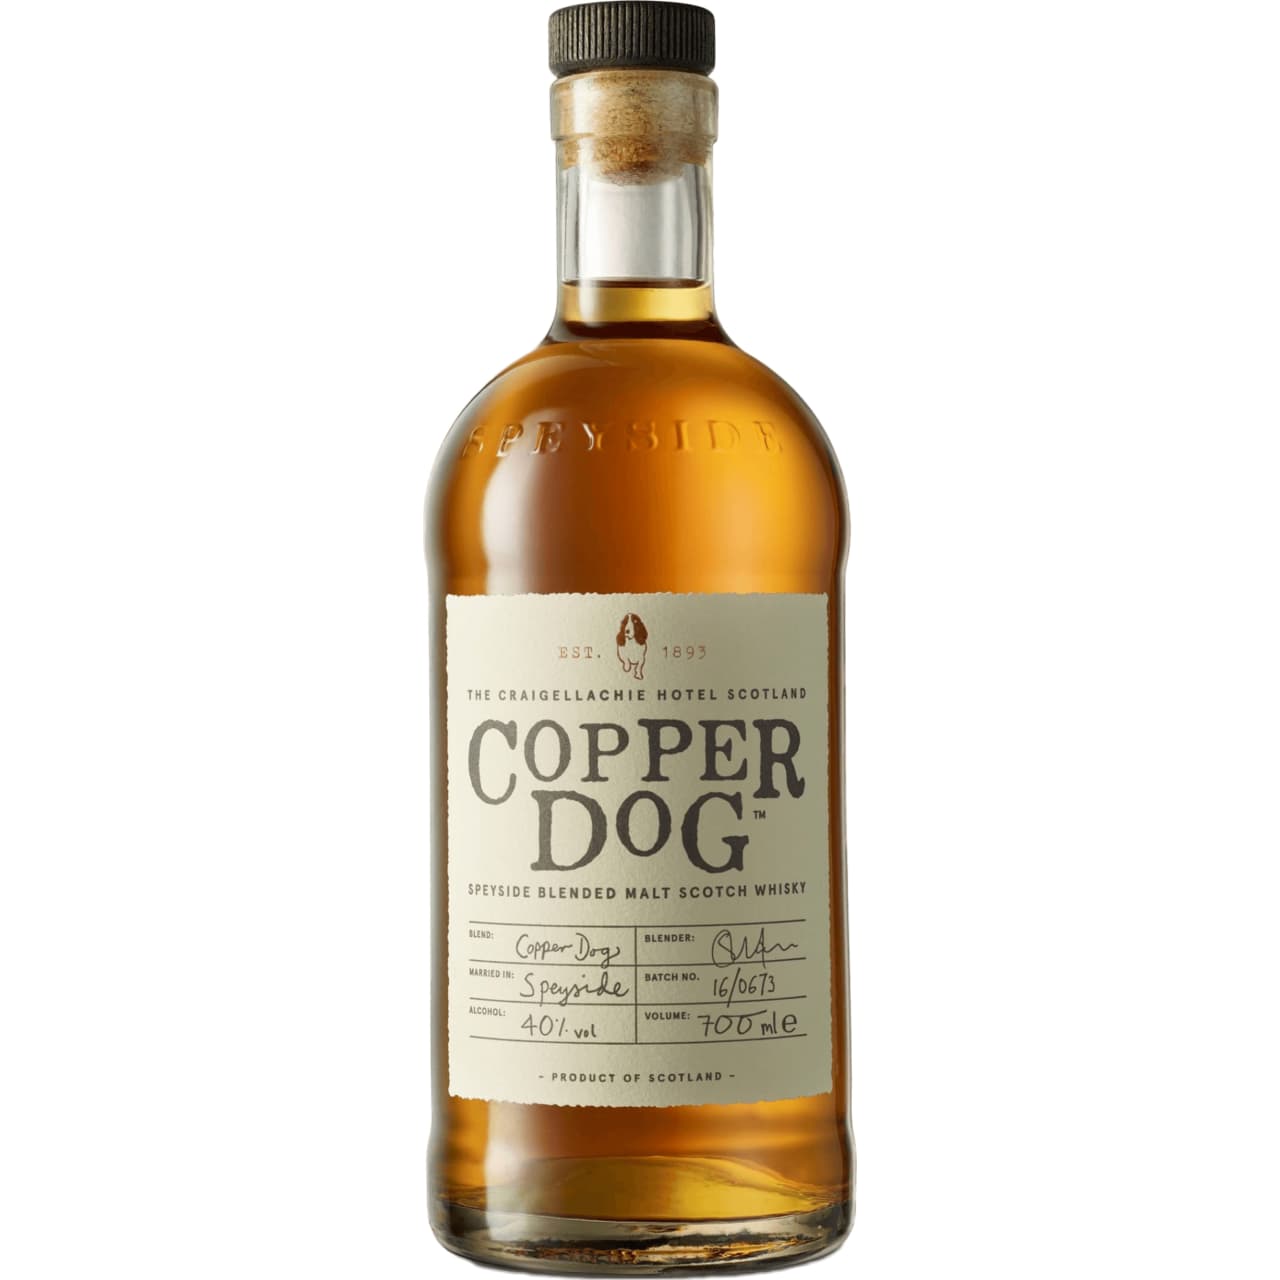 Copper Dog is an award winning whisky from the heart of Speyside, Scotland.